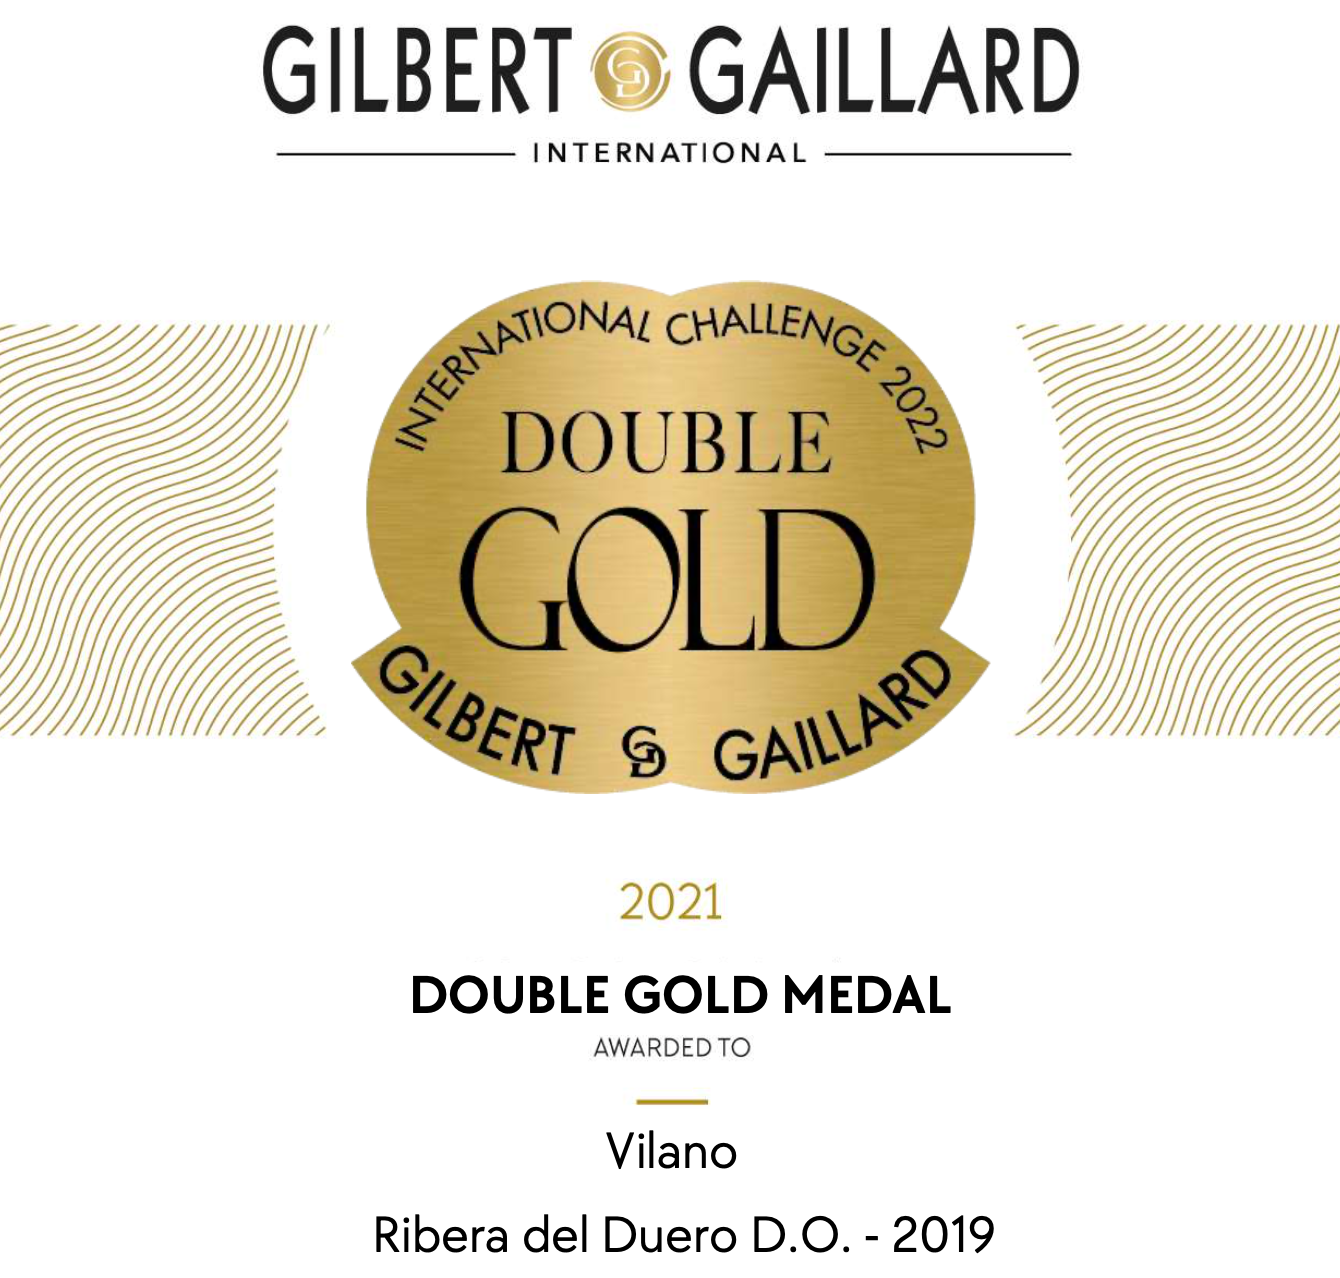 Bodegas Vilano once again positions its wines among the best in the world in the prestigious Gilbert & Gaillard